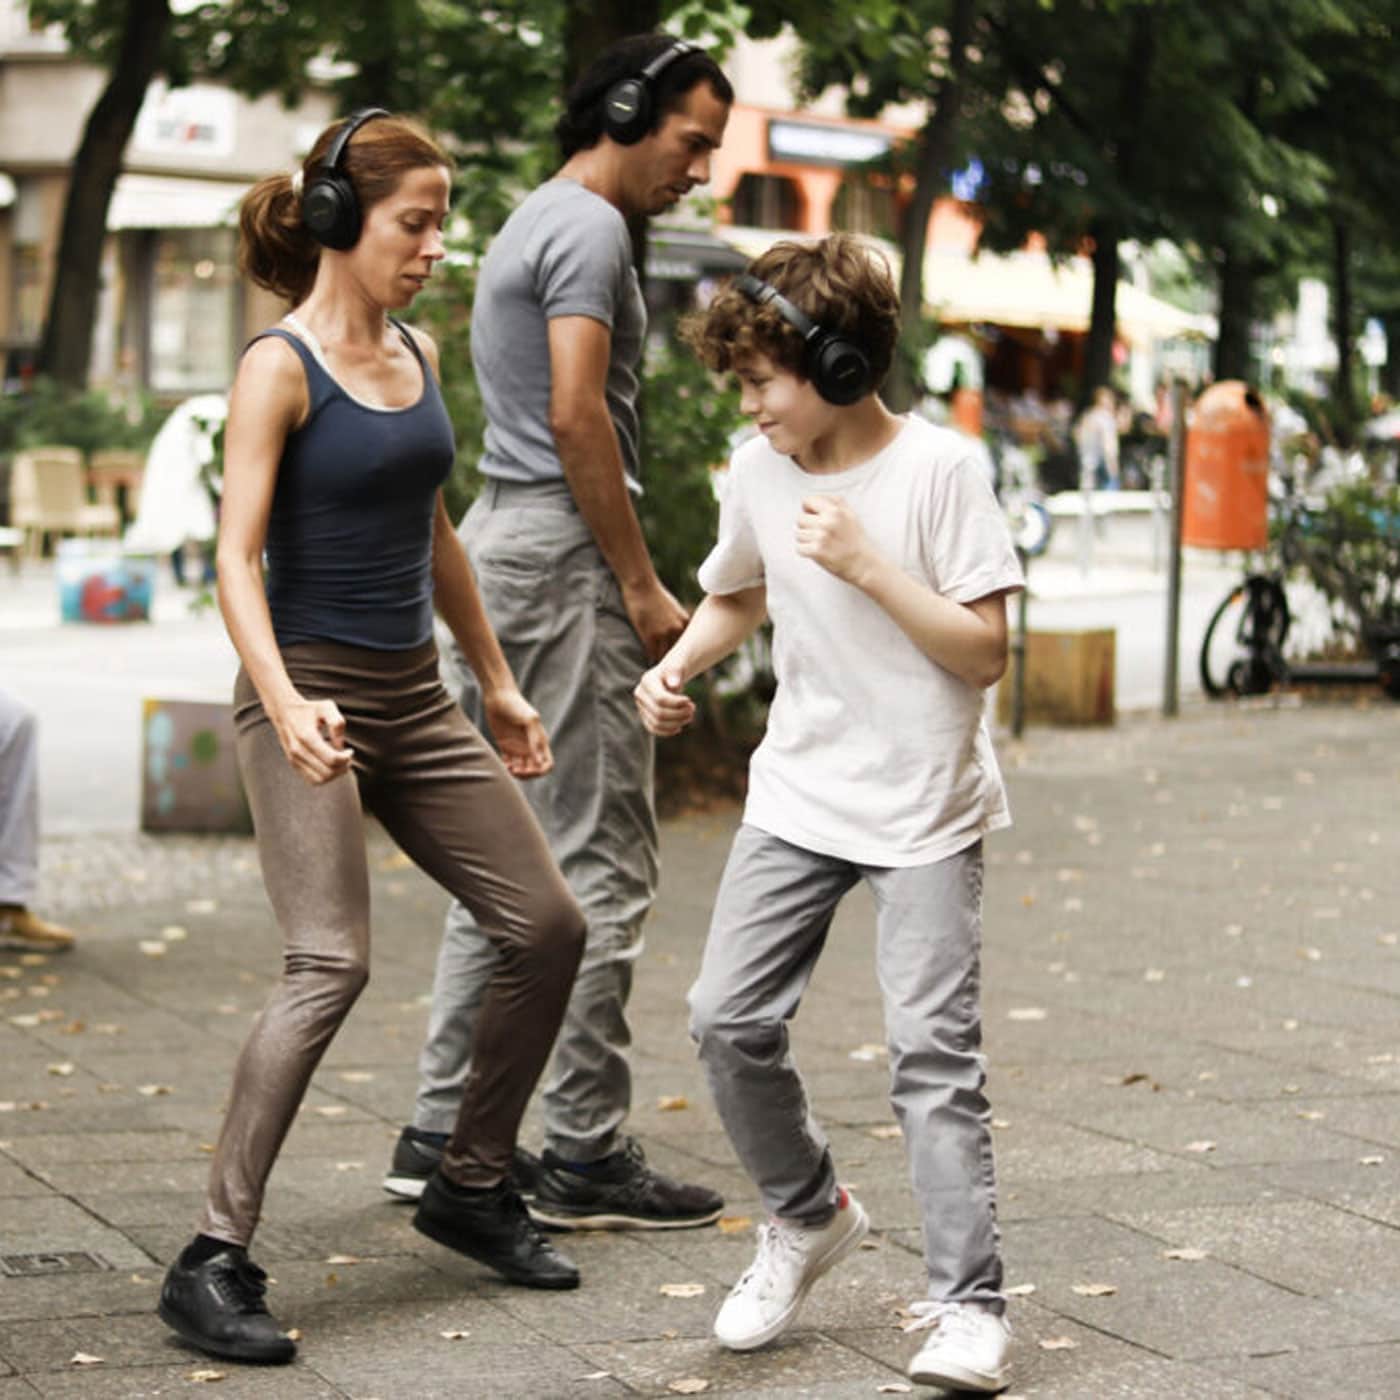 Outdoor-Theater-Events für Kinder und Familien in Berlin: Jo Parkes The Walking Project // HIMBEER